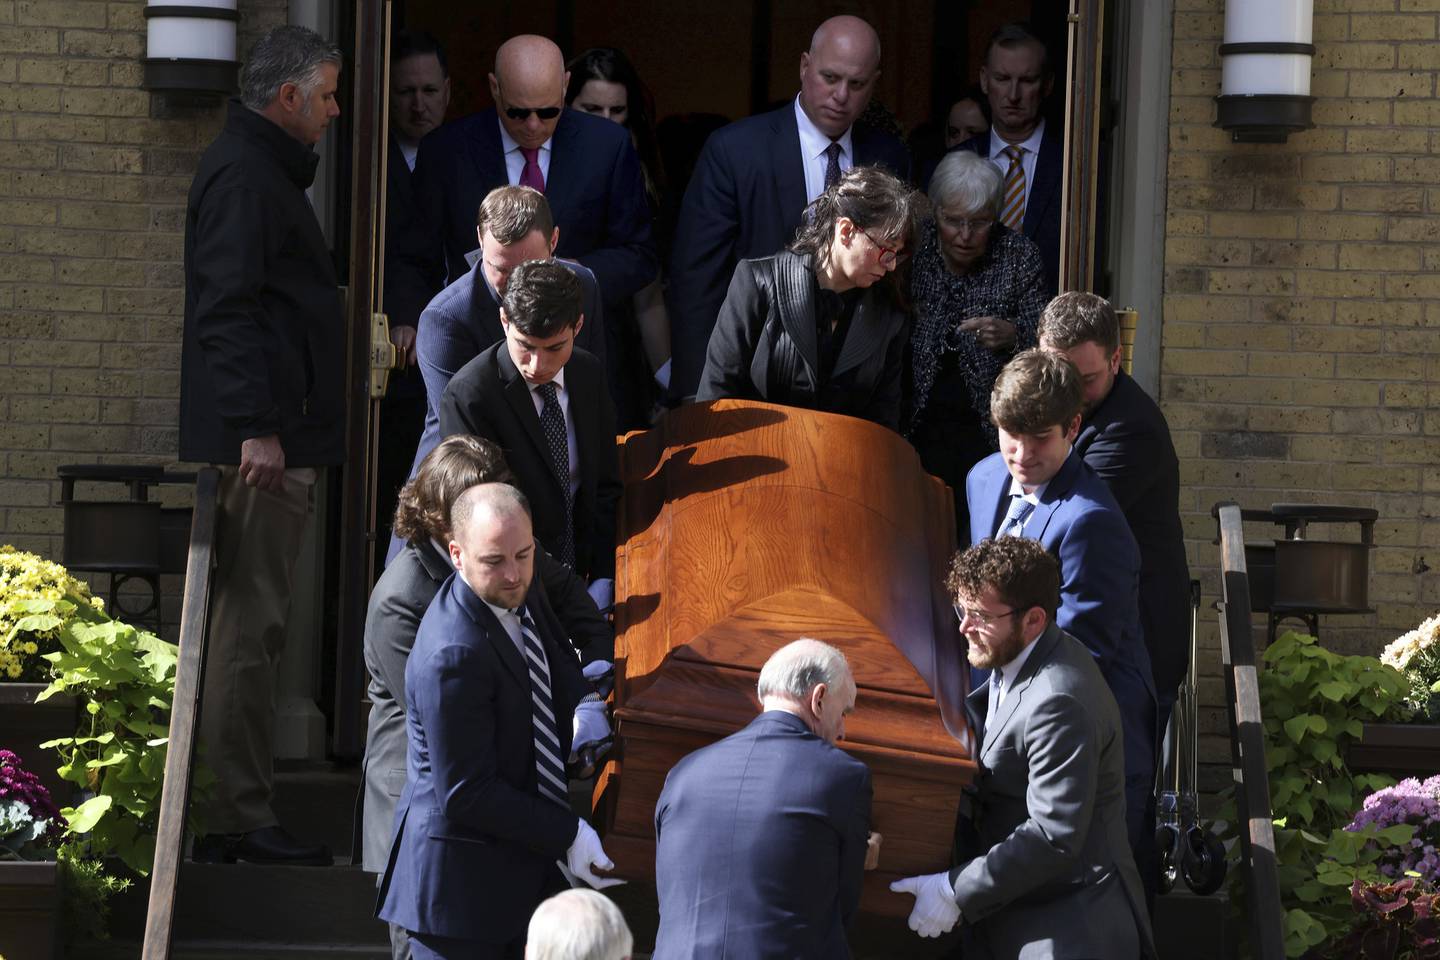 Pallbearers carry the casket of former Bears general manager Jerry Vainisi following his funeral at Old St. Patrick’s Church in Chicago on Oct. 14, 2022.  